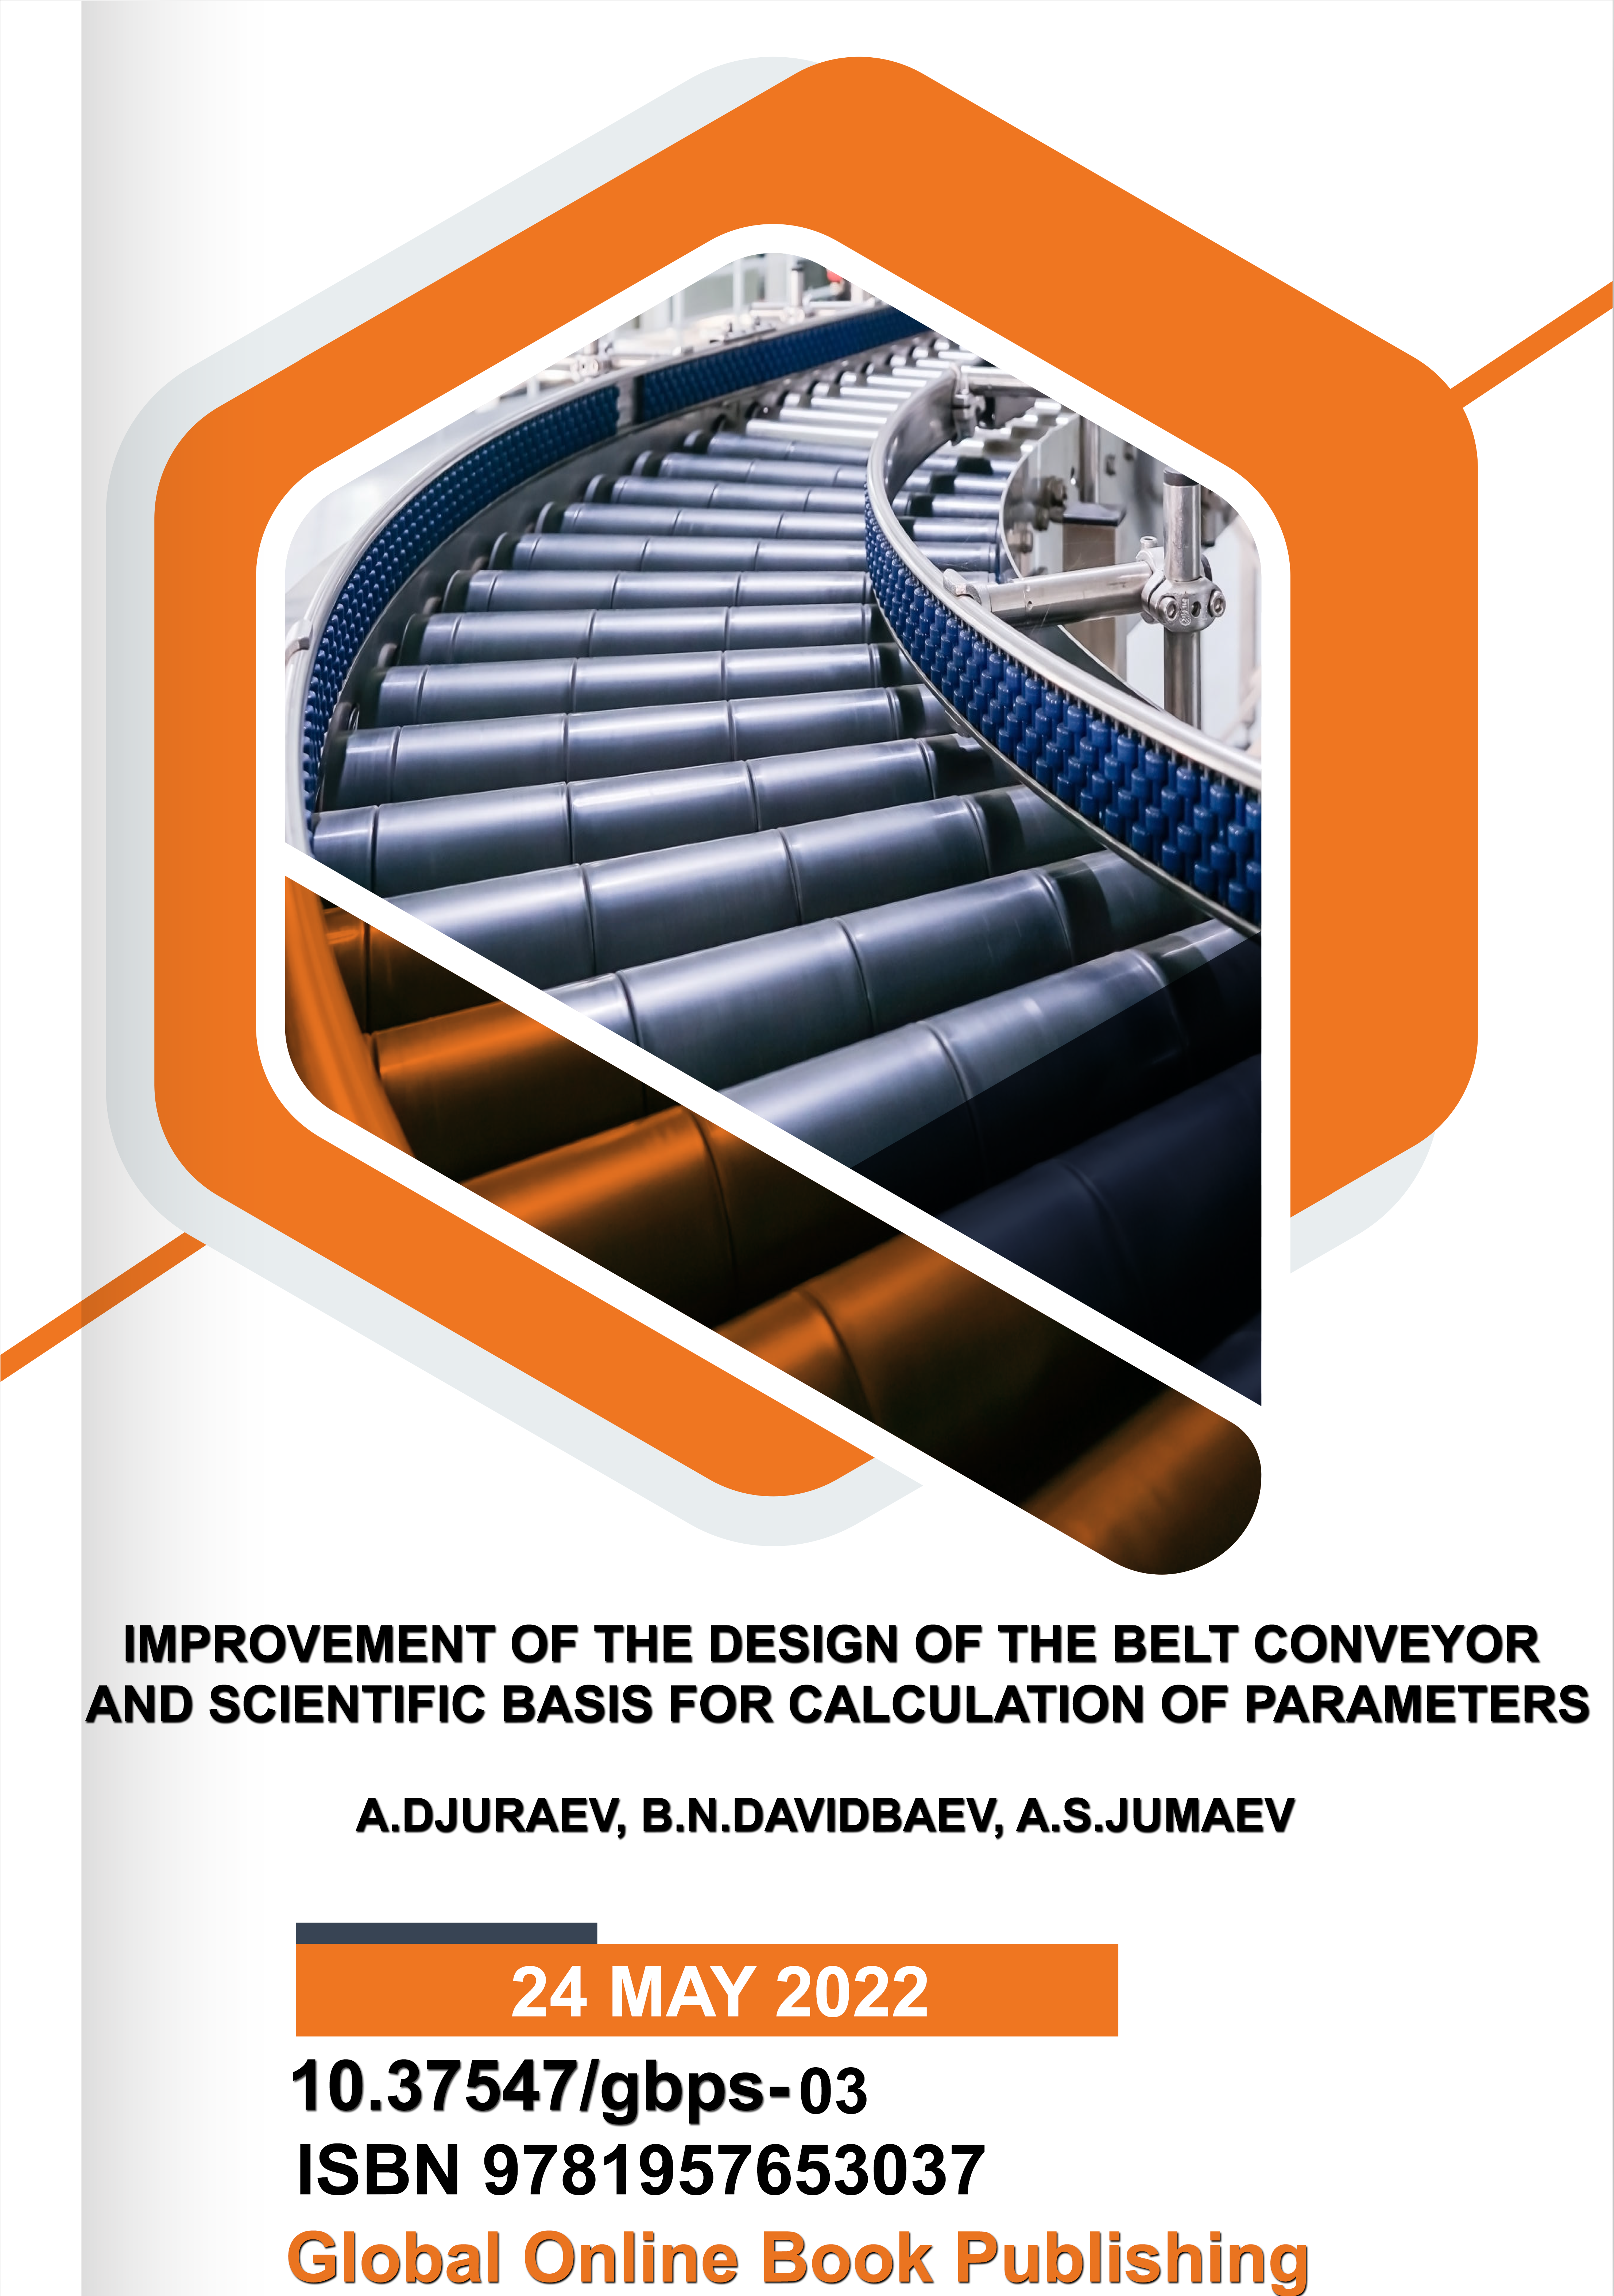 					View IMPROVEMENT OF THE DESIGN OF THE BELT CONVEYOR AND SCIENTIFIC BASIS FOR CALCULATION OF PARAMETERS
				